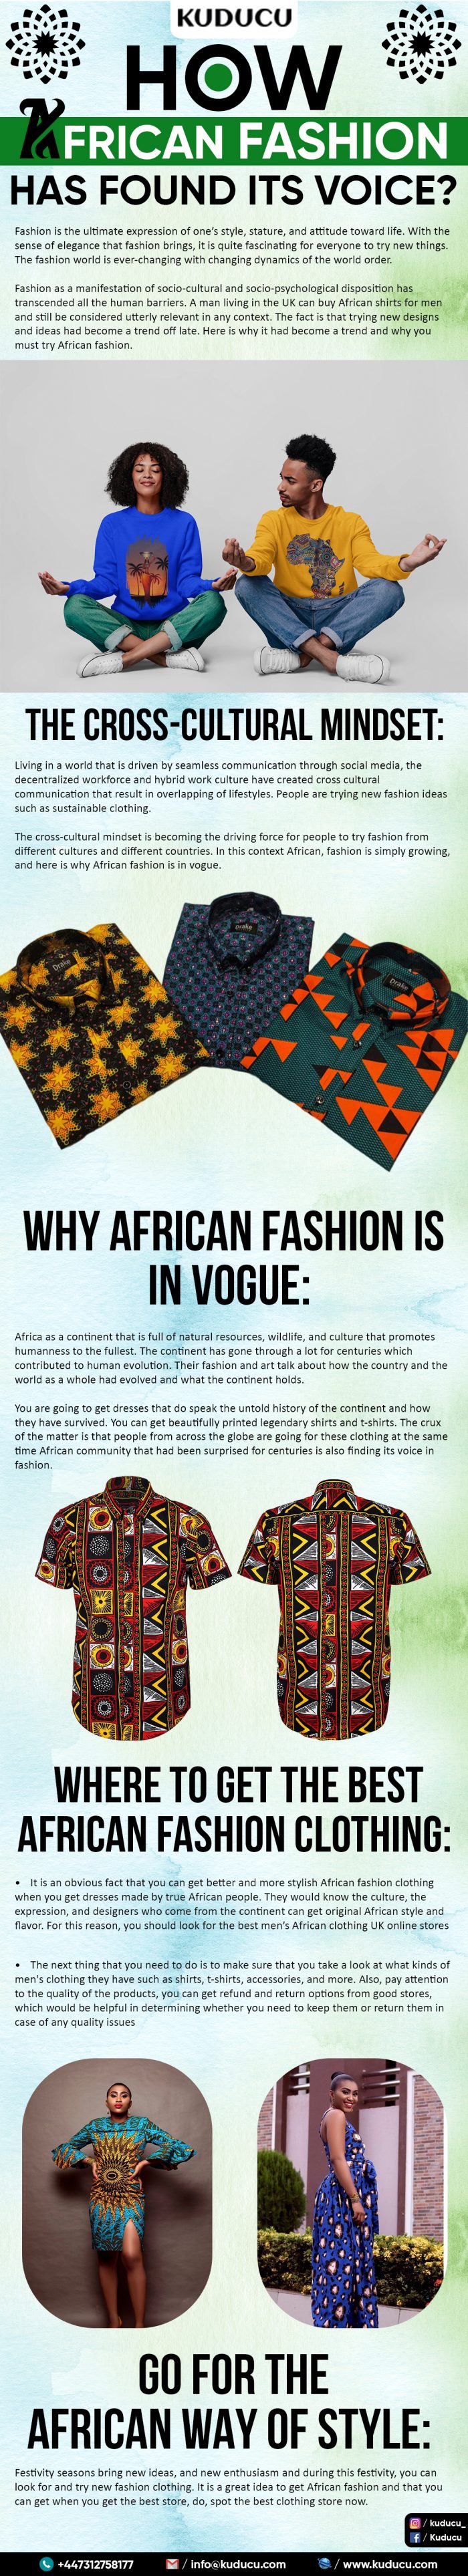 How African Fashion Has Found Its Voice?